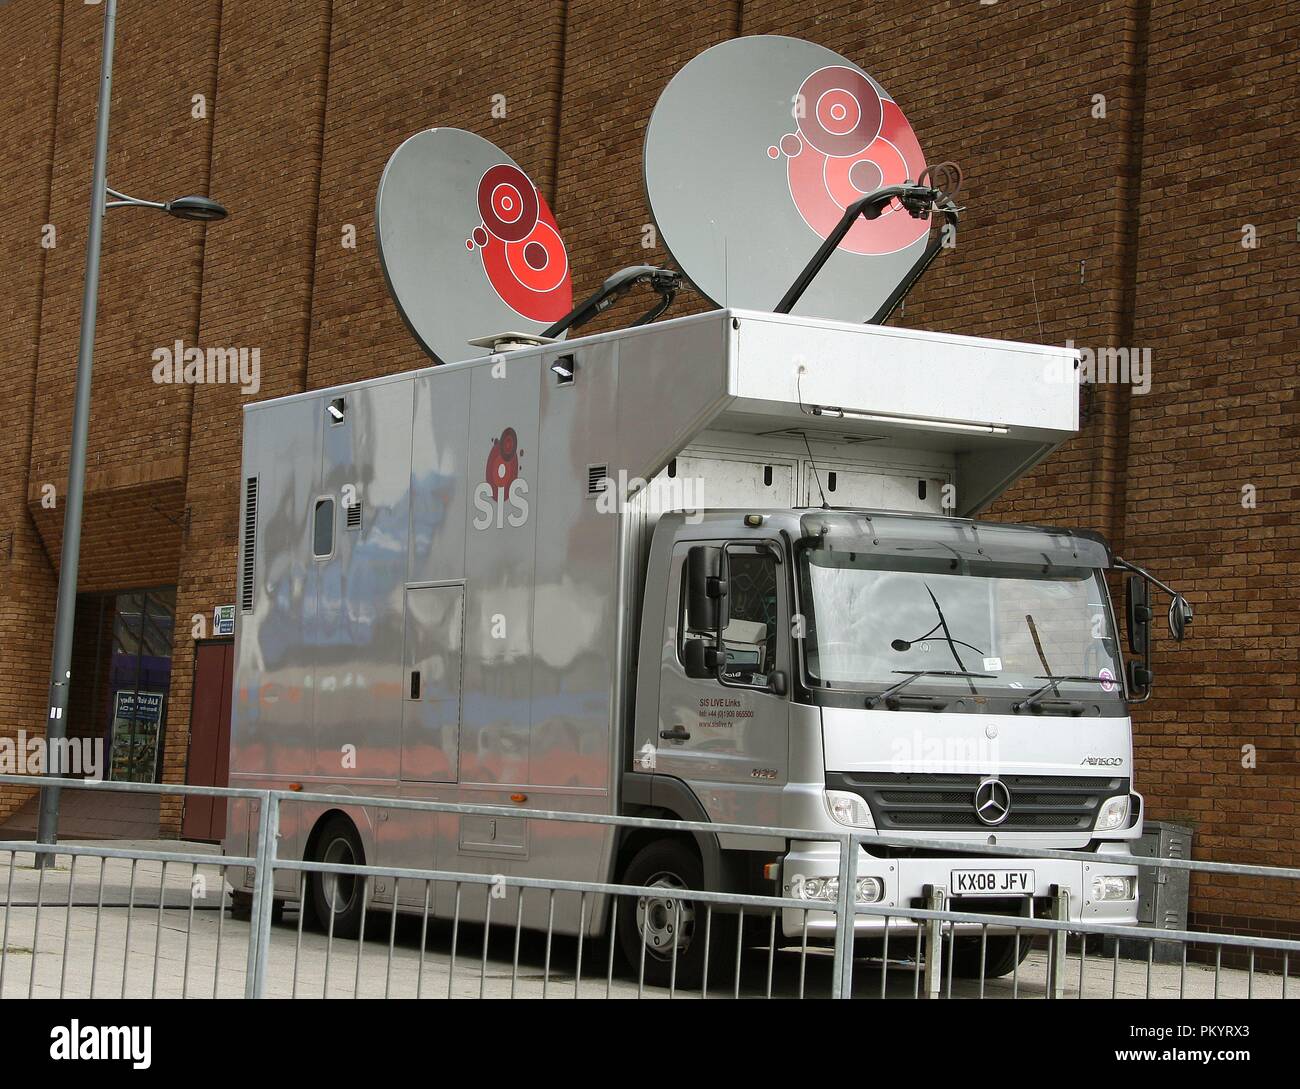 SIS Media satellite broadcast vehicle near the finish line at the 1st stage of the Tour of Britain 2018 in the city of Newport South Wales GB UK 2018 Stock Photo